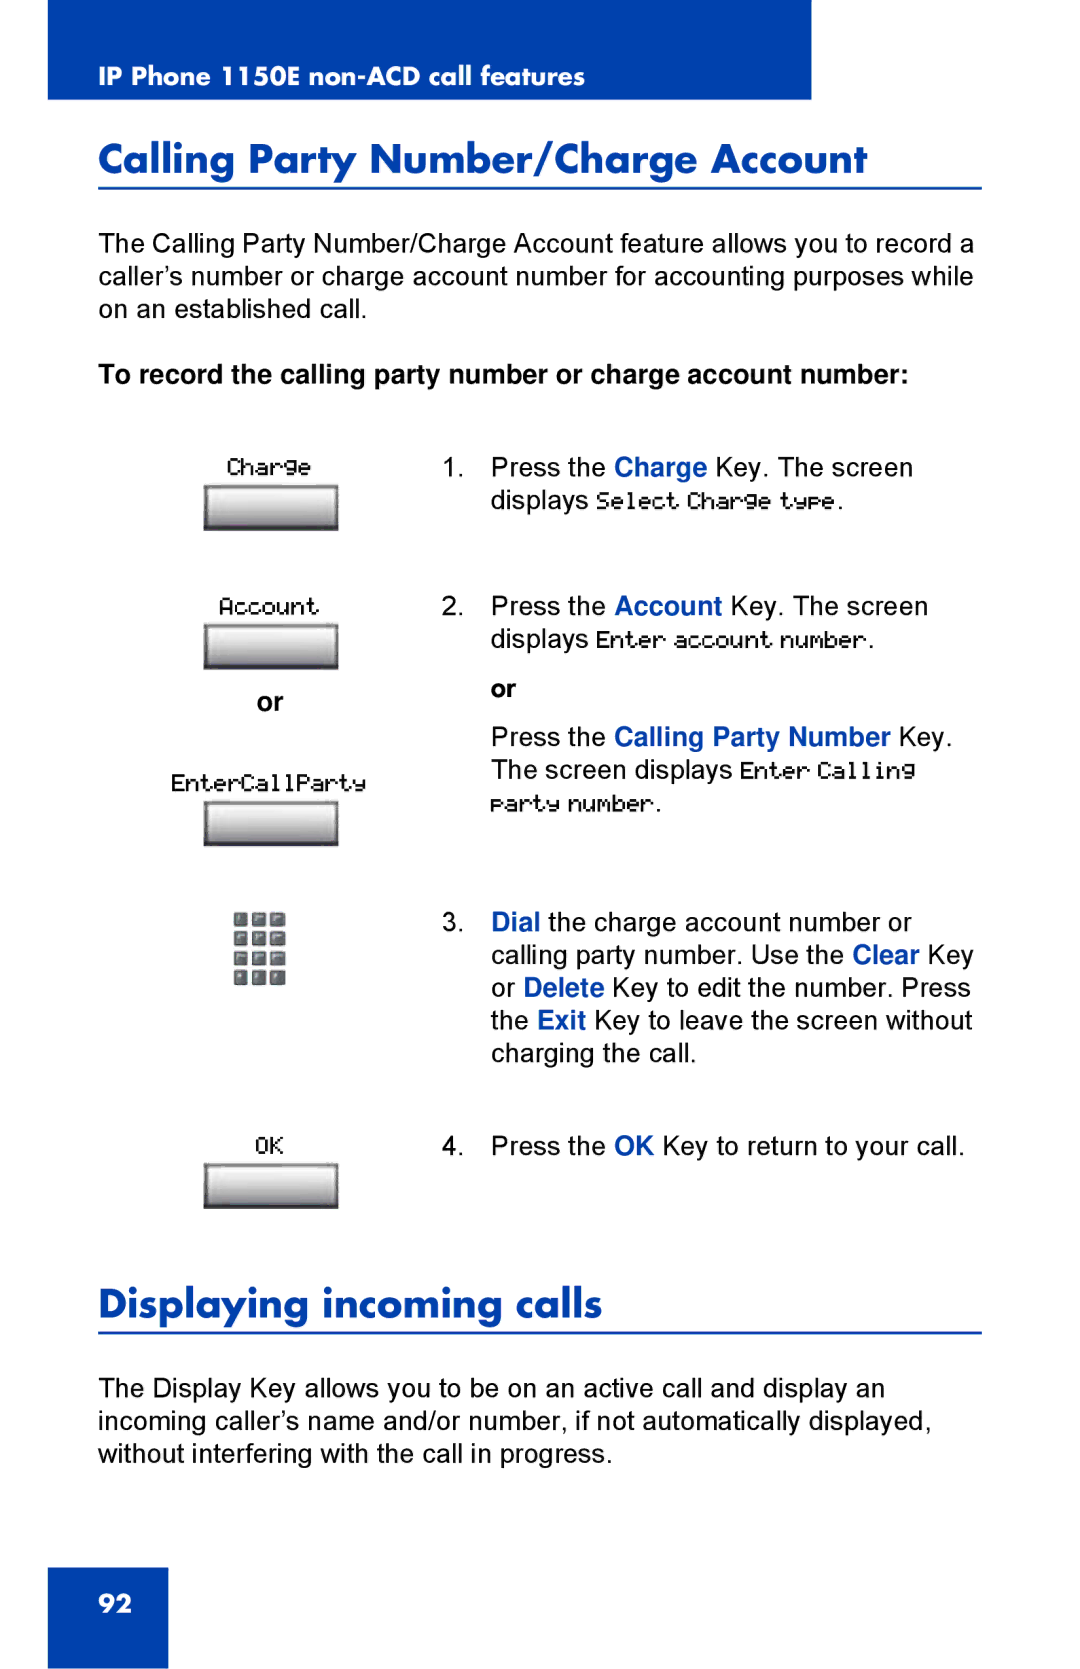 Nortel Networks 1150E manual Calling Party Number/Charge Account, Displaying incoming calls 